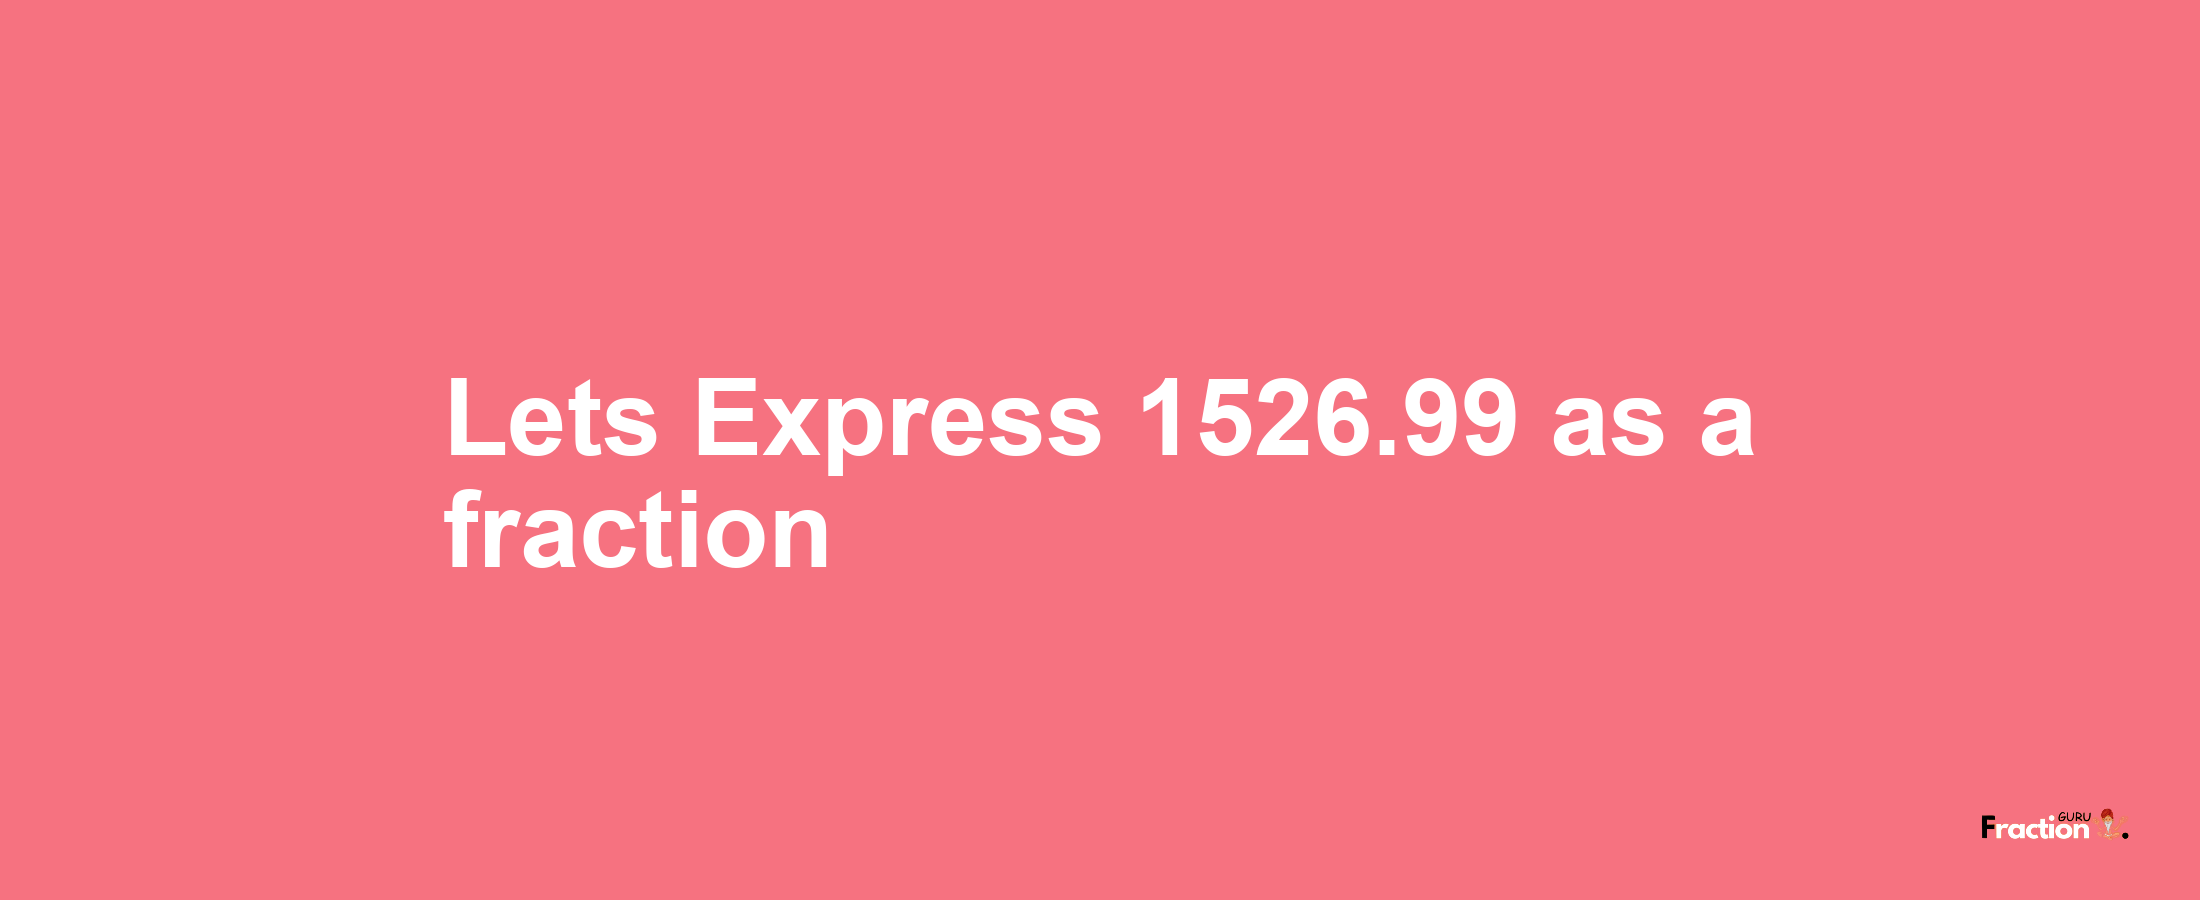 Lets Express 1526.99 as afraction